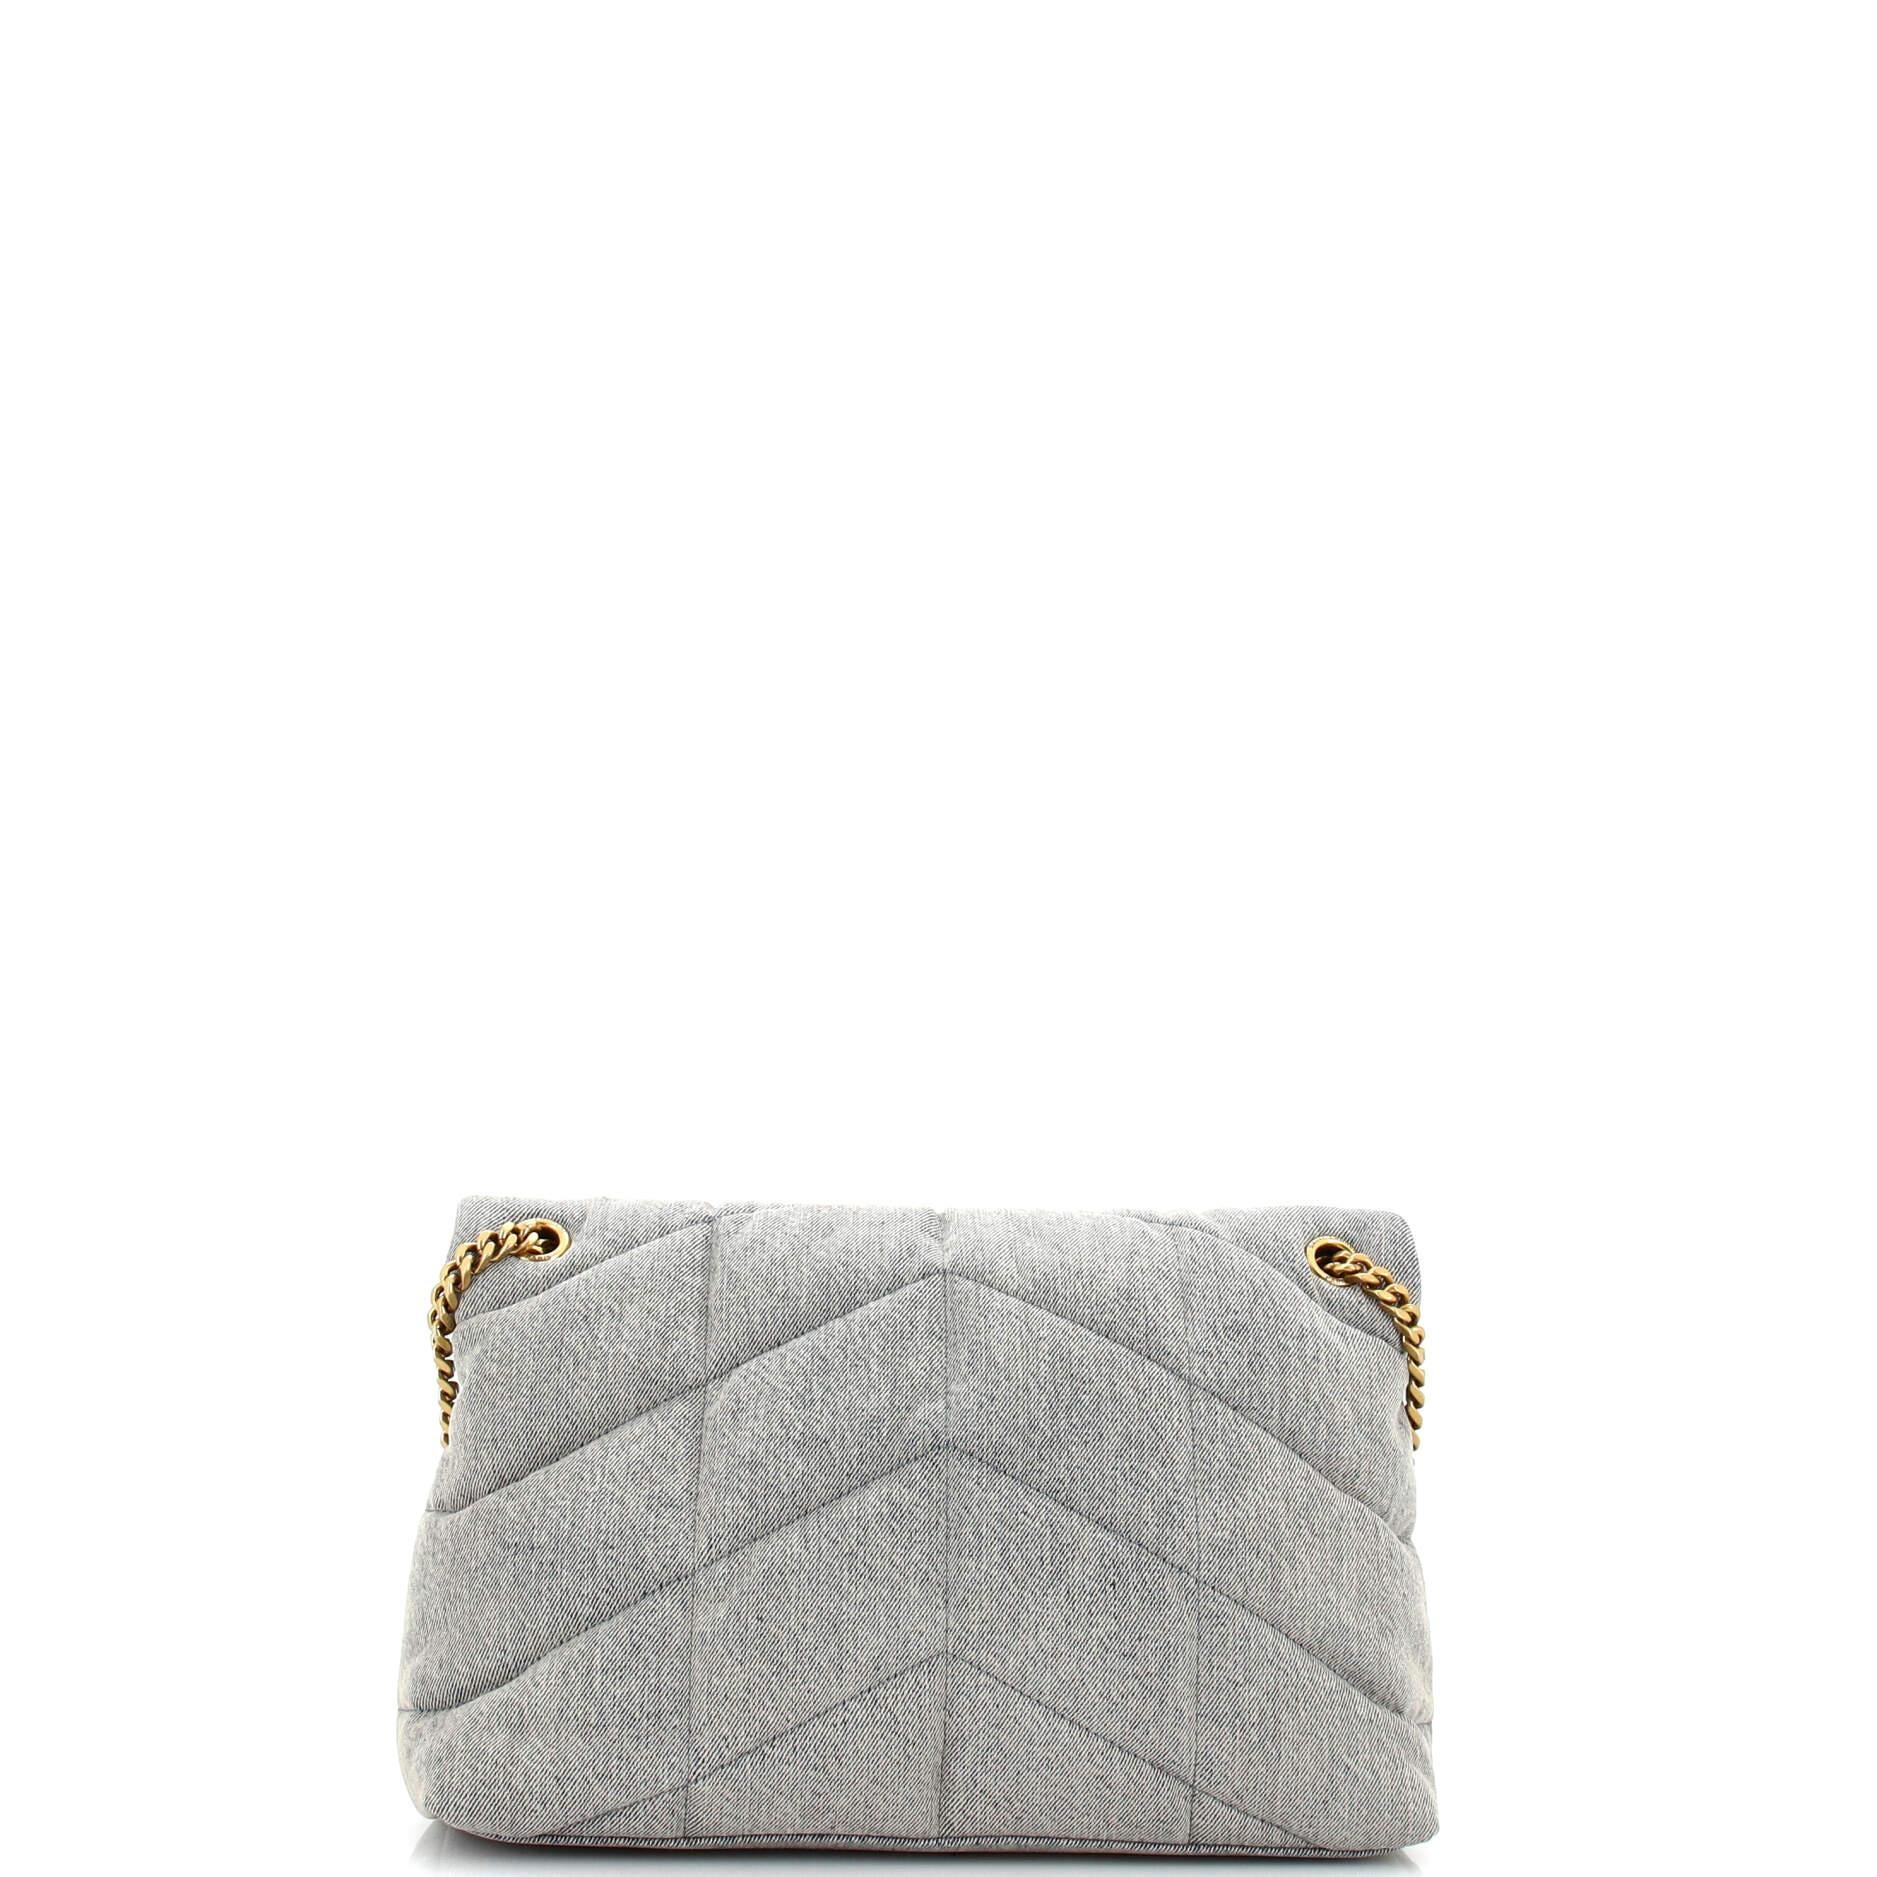 Saint Laurent  Loulou Puffer Shoulder Bag Quilted Vintage Denim Medium In Good Condition For Sale In NY, NY